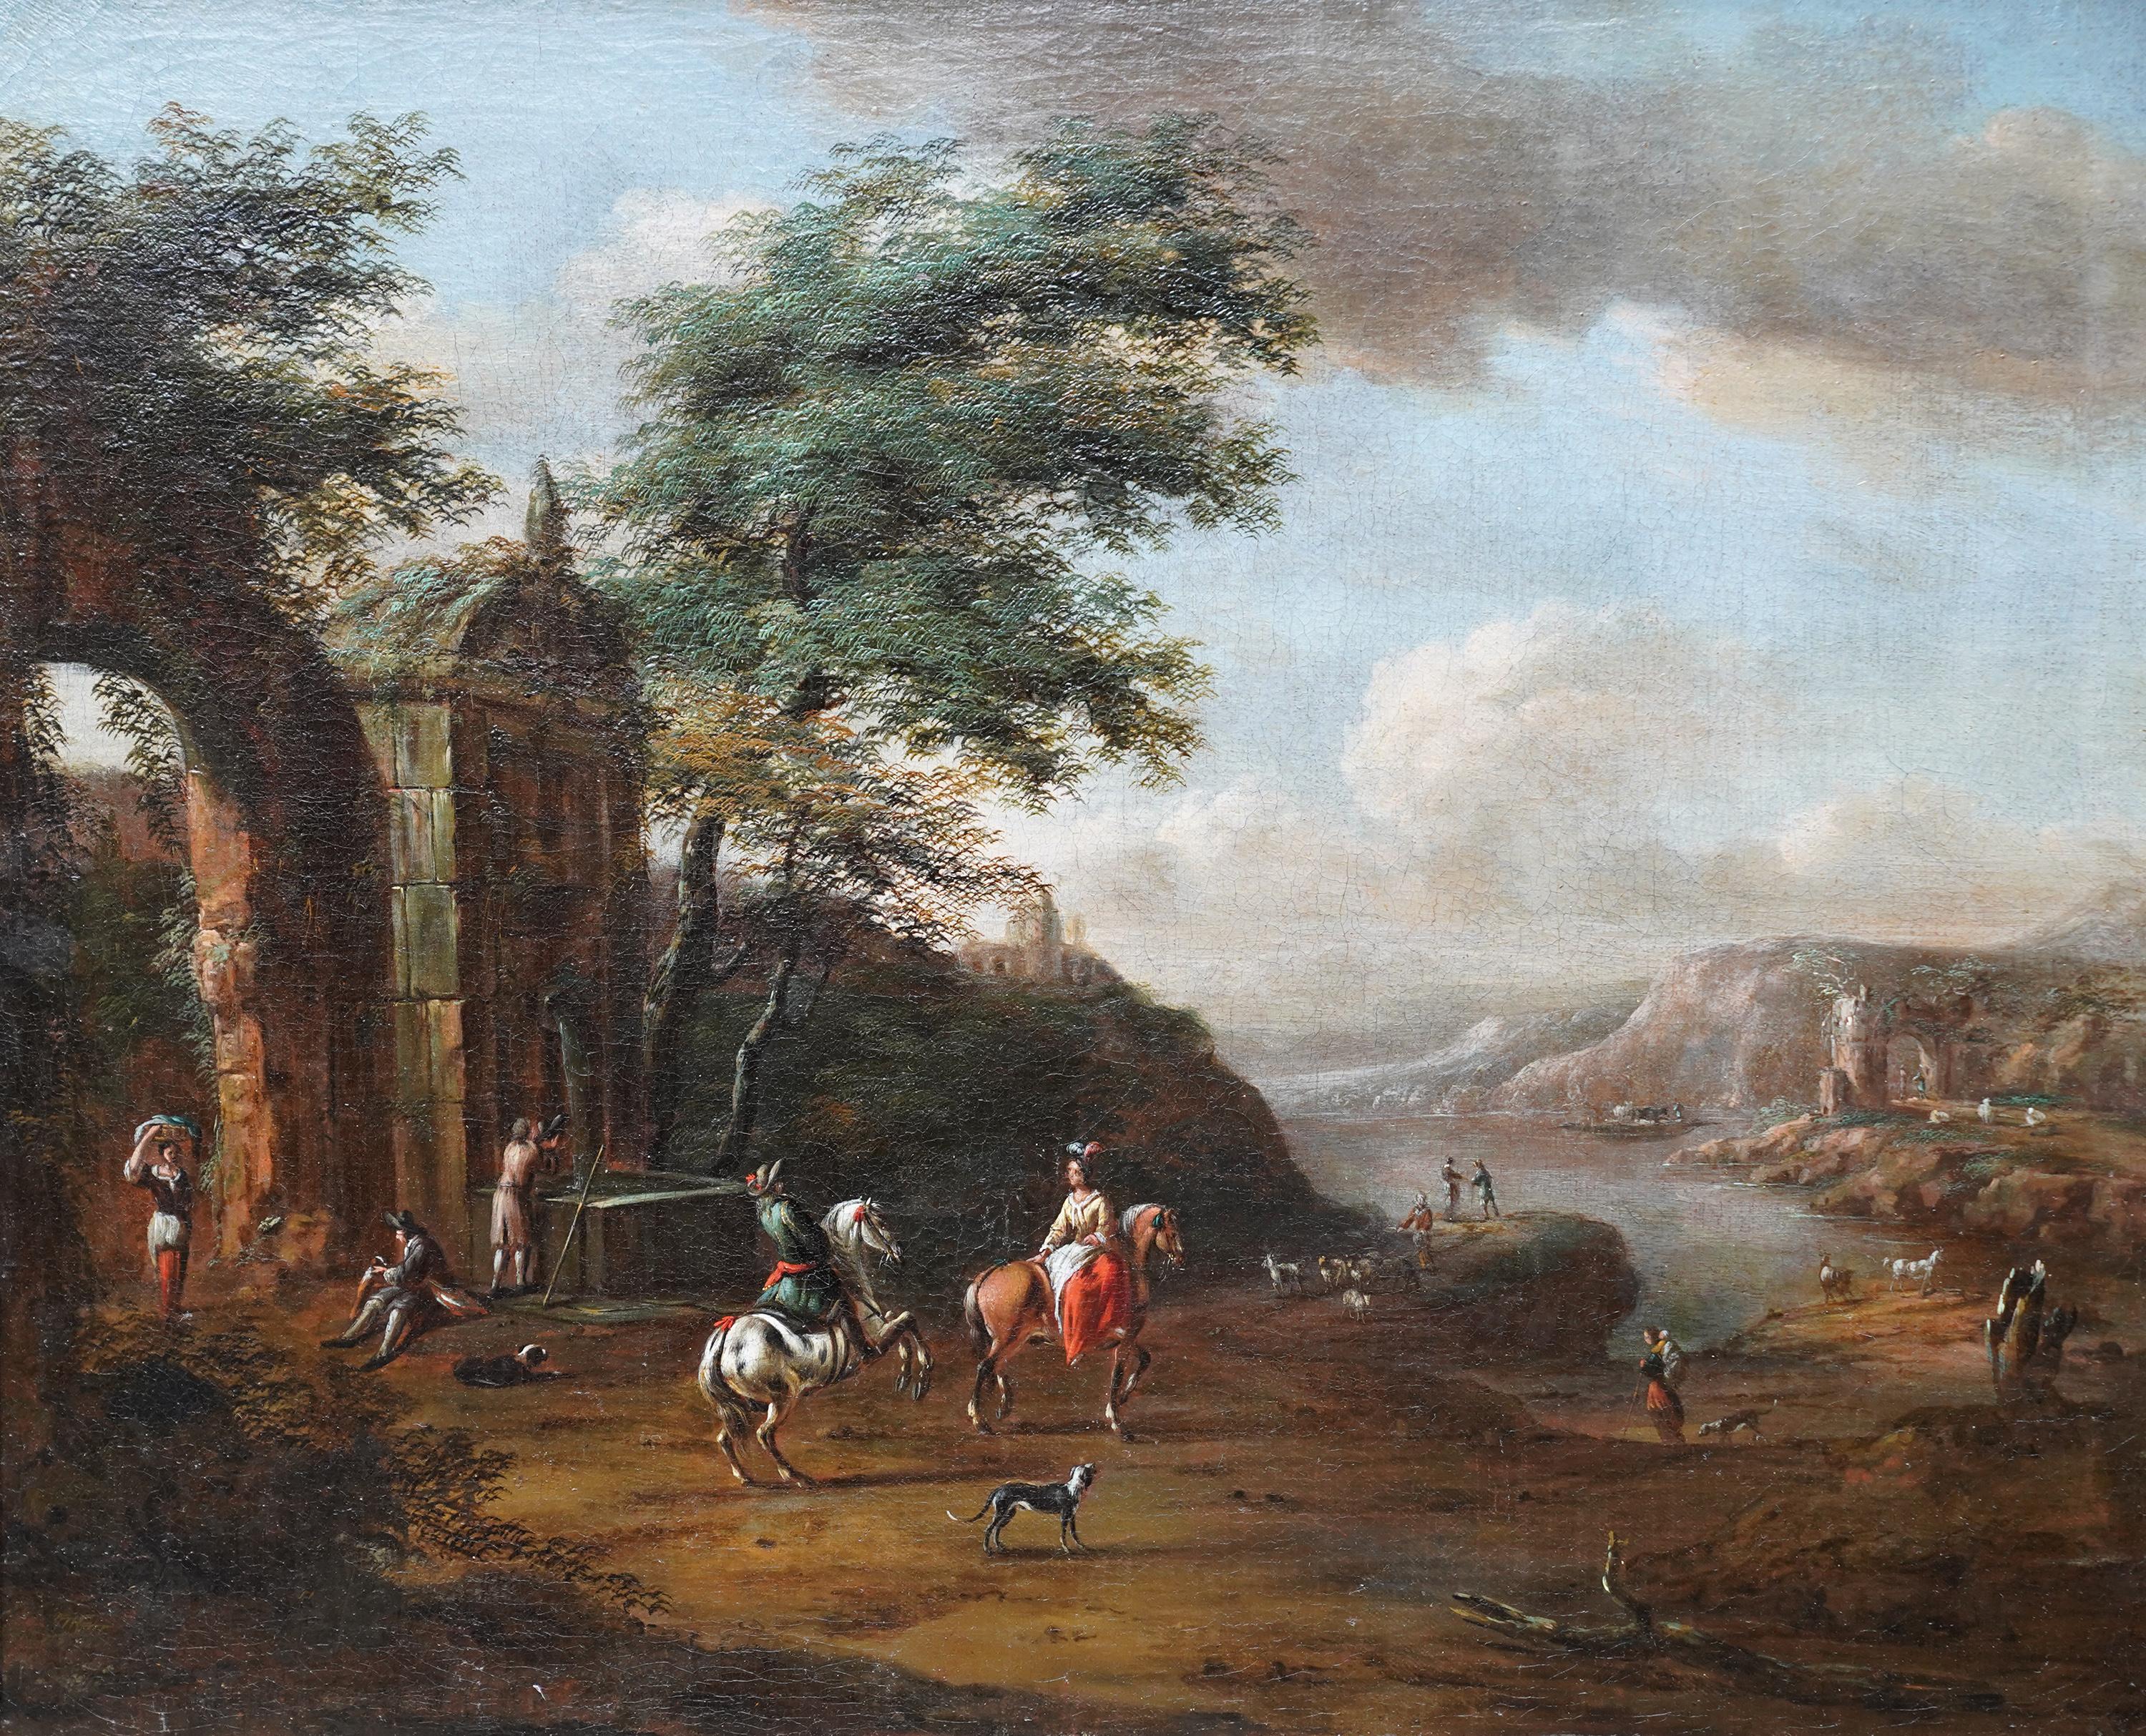 Travellers near Ruins in a Landscape - Dutch Old Master art figural oil painting For Sale 7